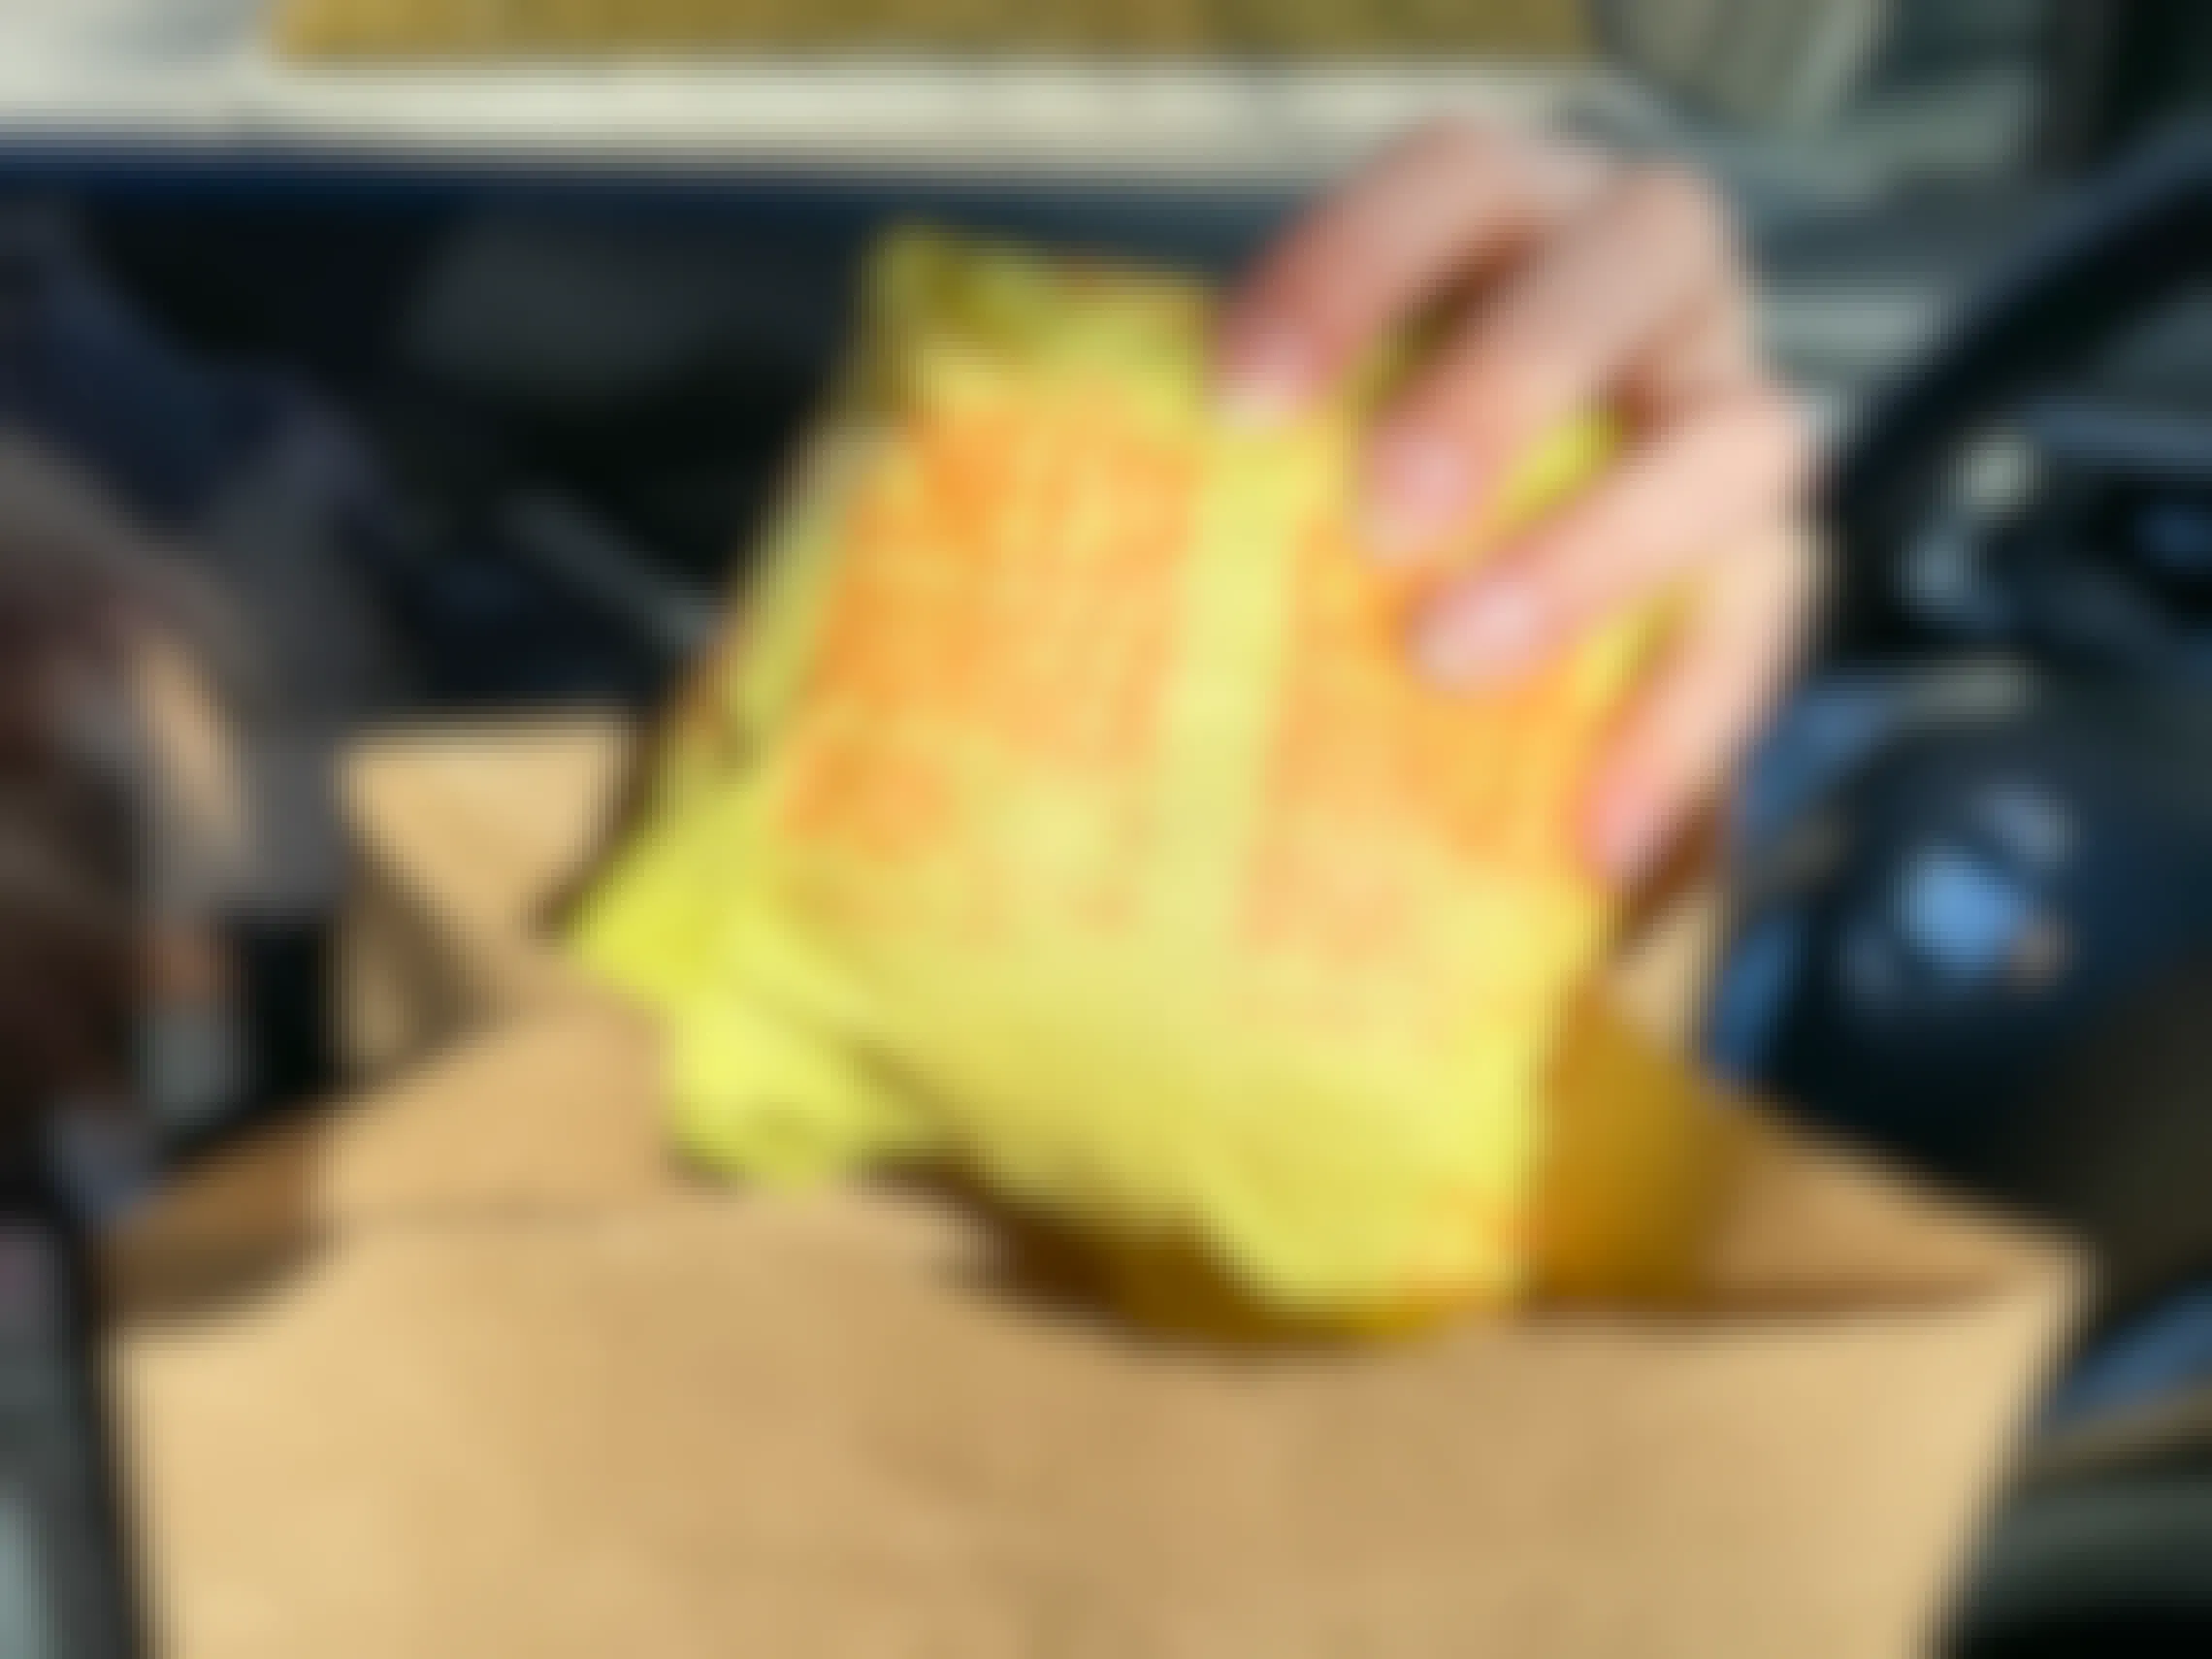 A person pulling a wrapped McDonald's cheeseburger out of a McDonald's bag while sitting in their car.